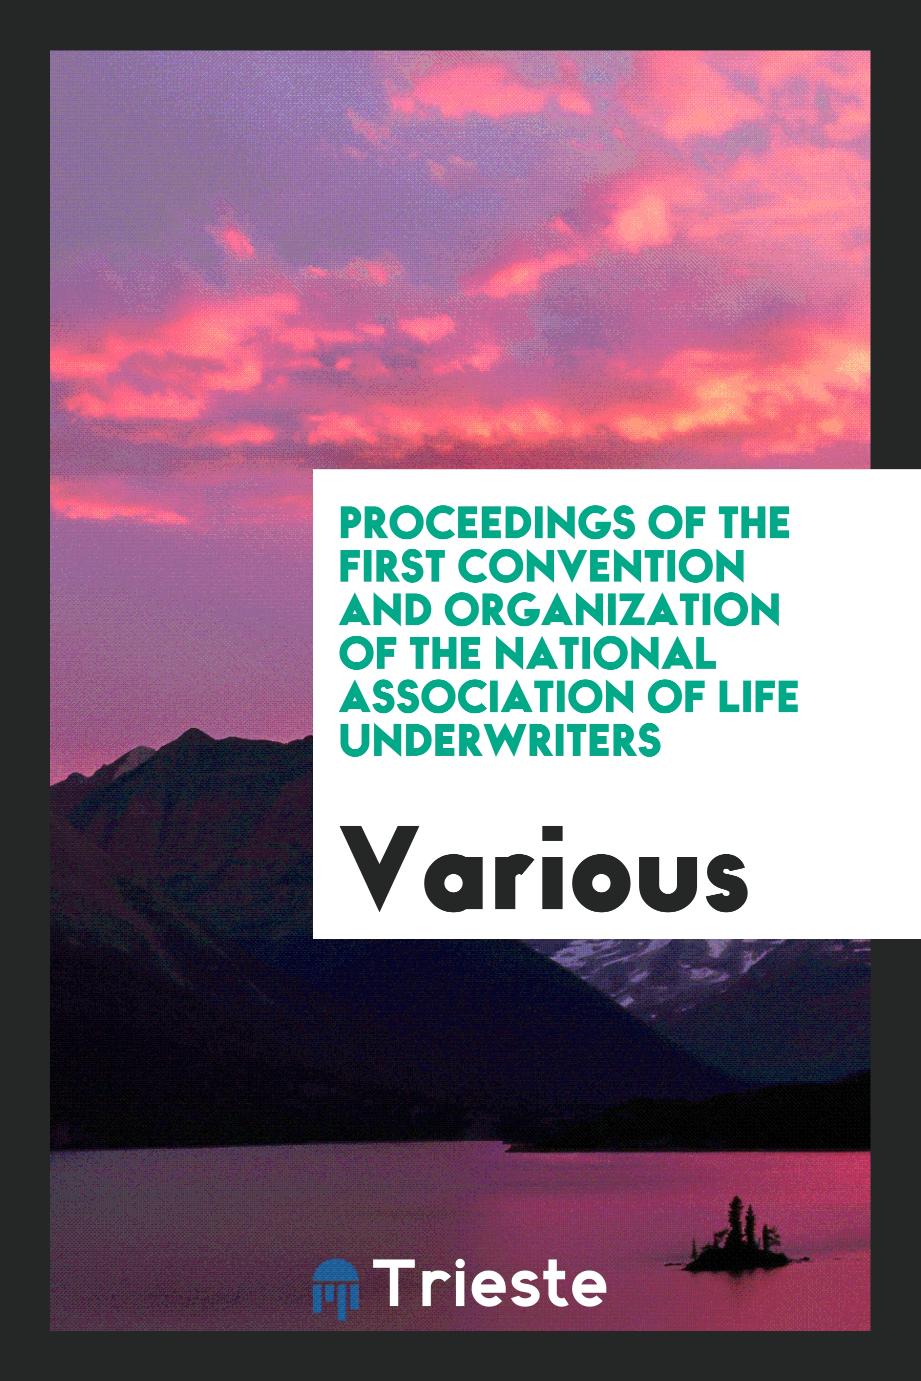 Proceedings of the First Convention and Organization of the National Association of Life Underwriters